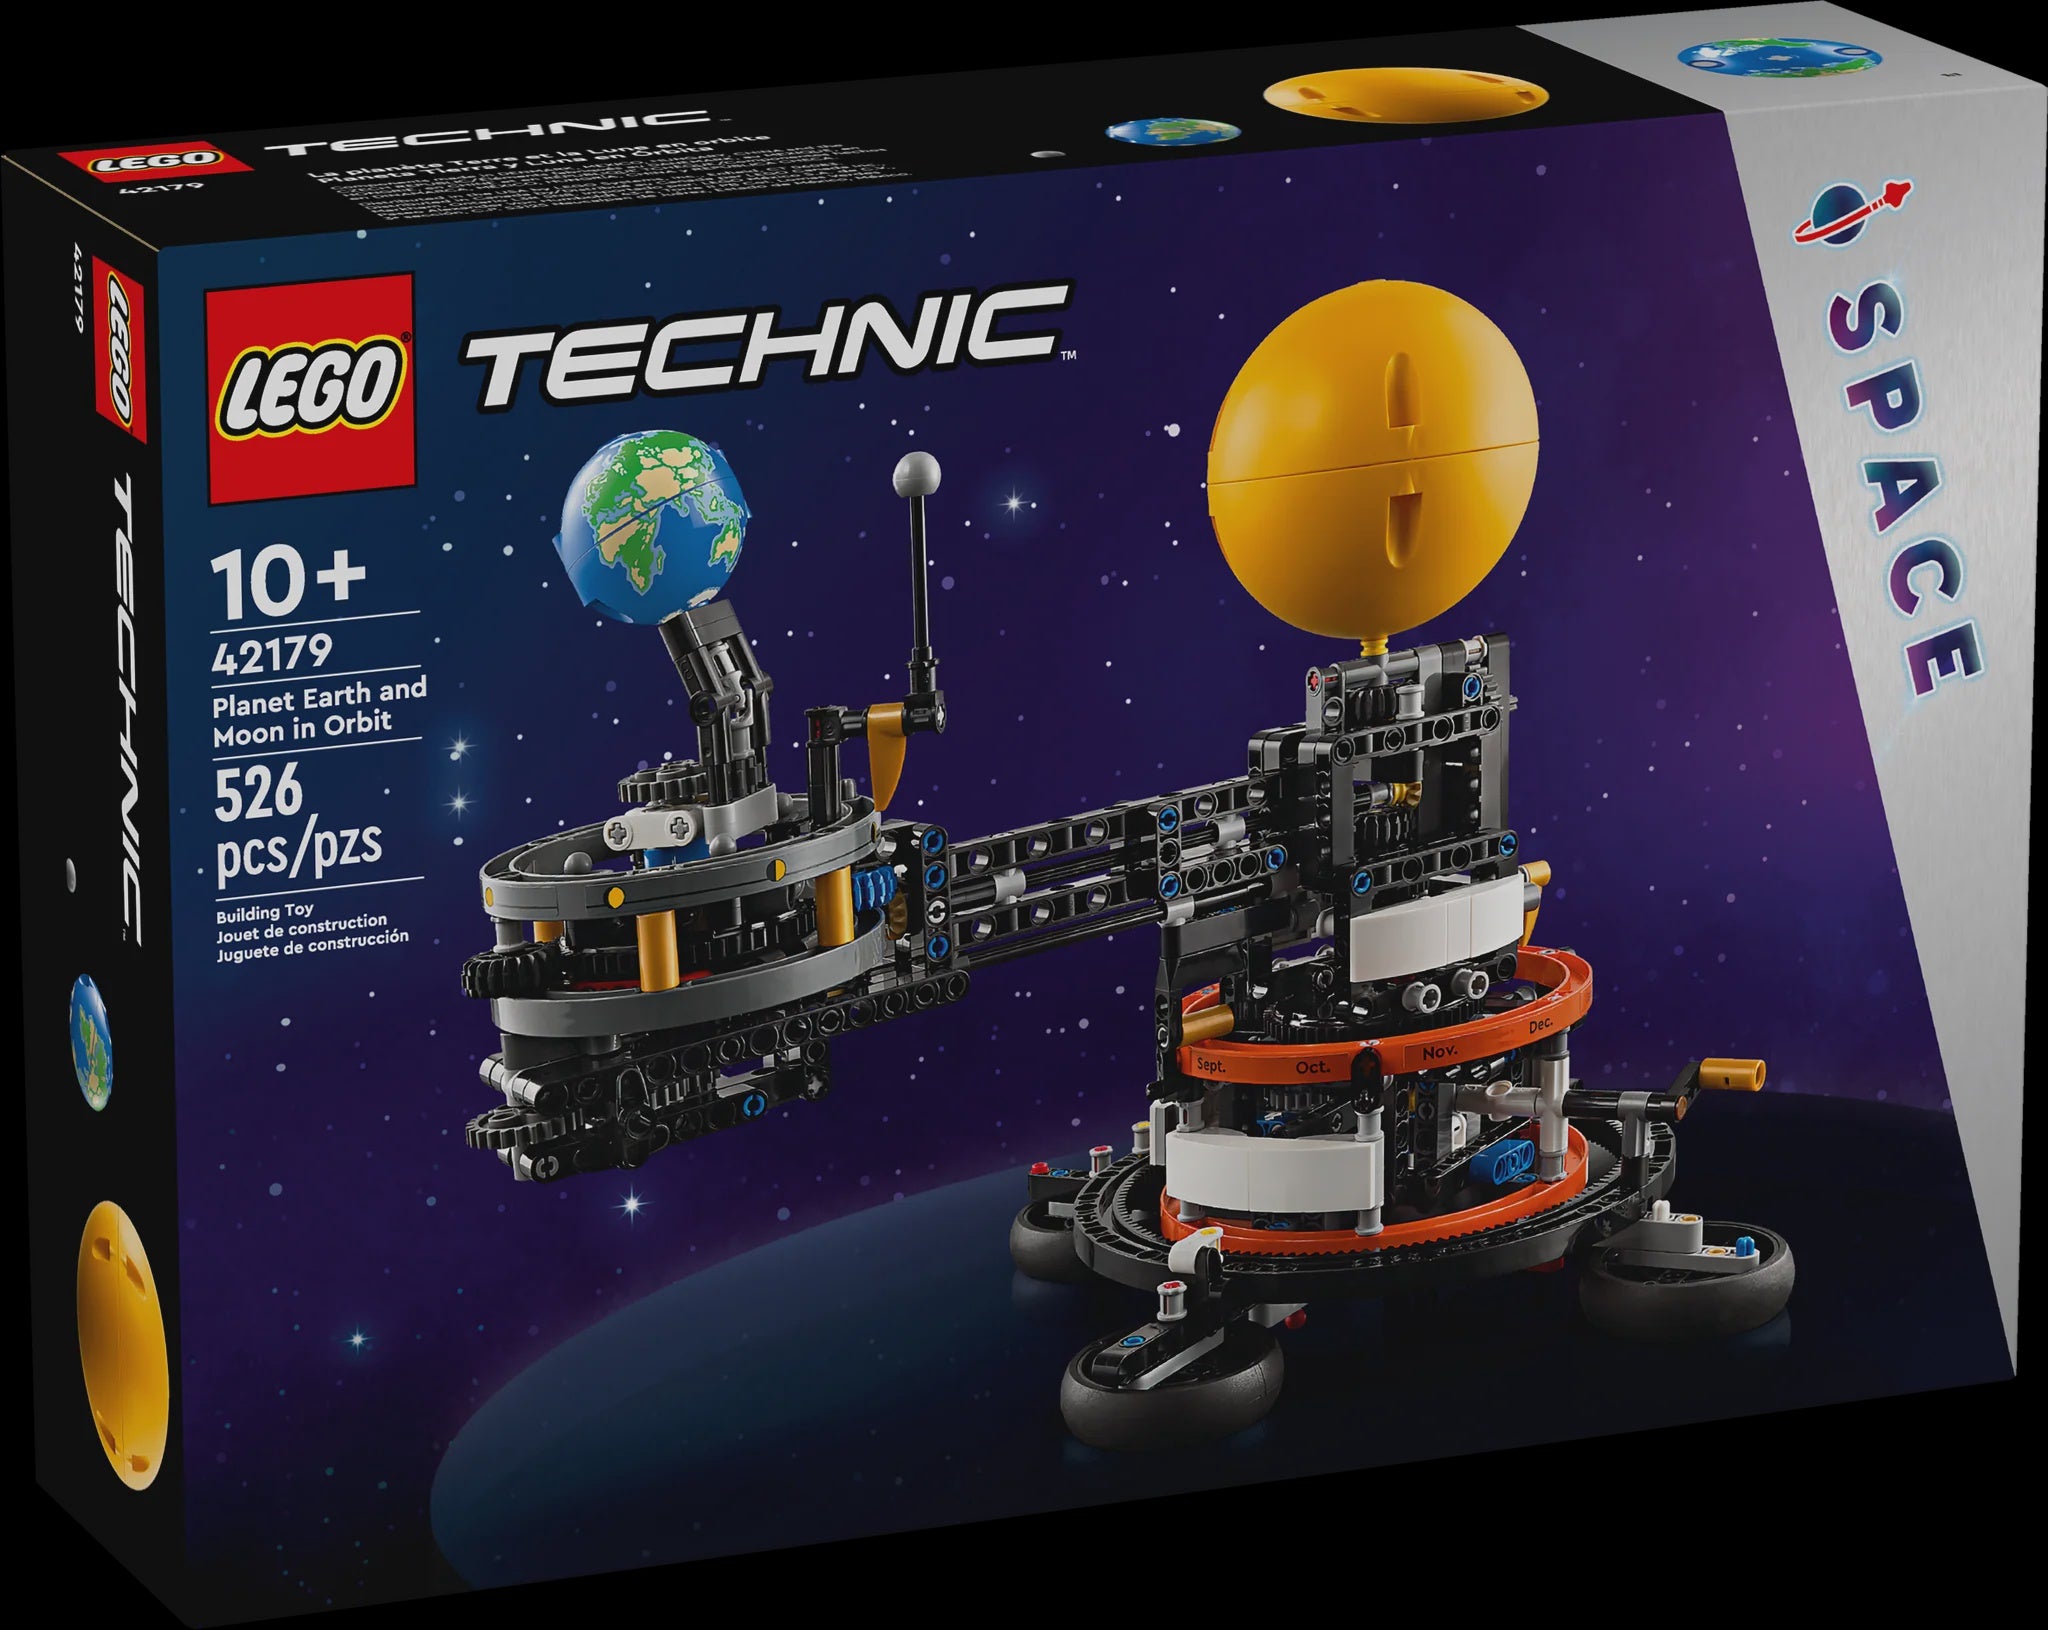 Lego Technic: Planet Earth and Moon in Orbit 42179